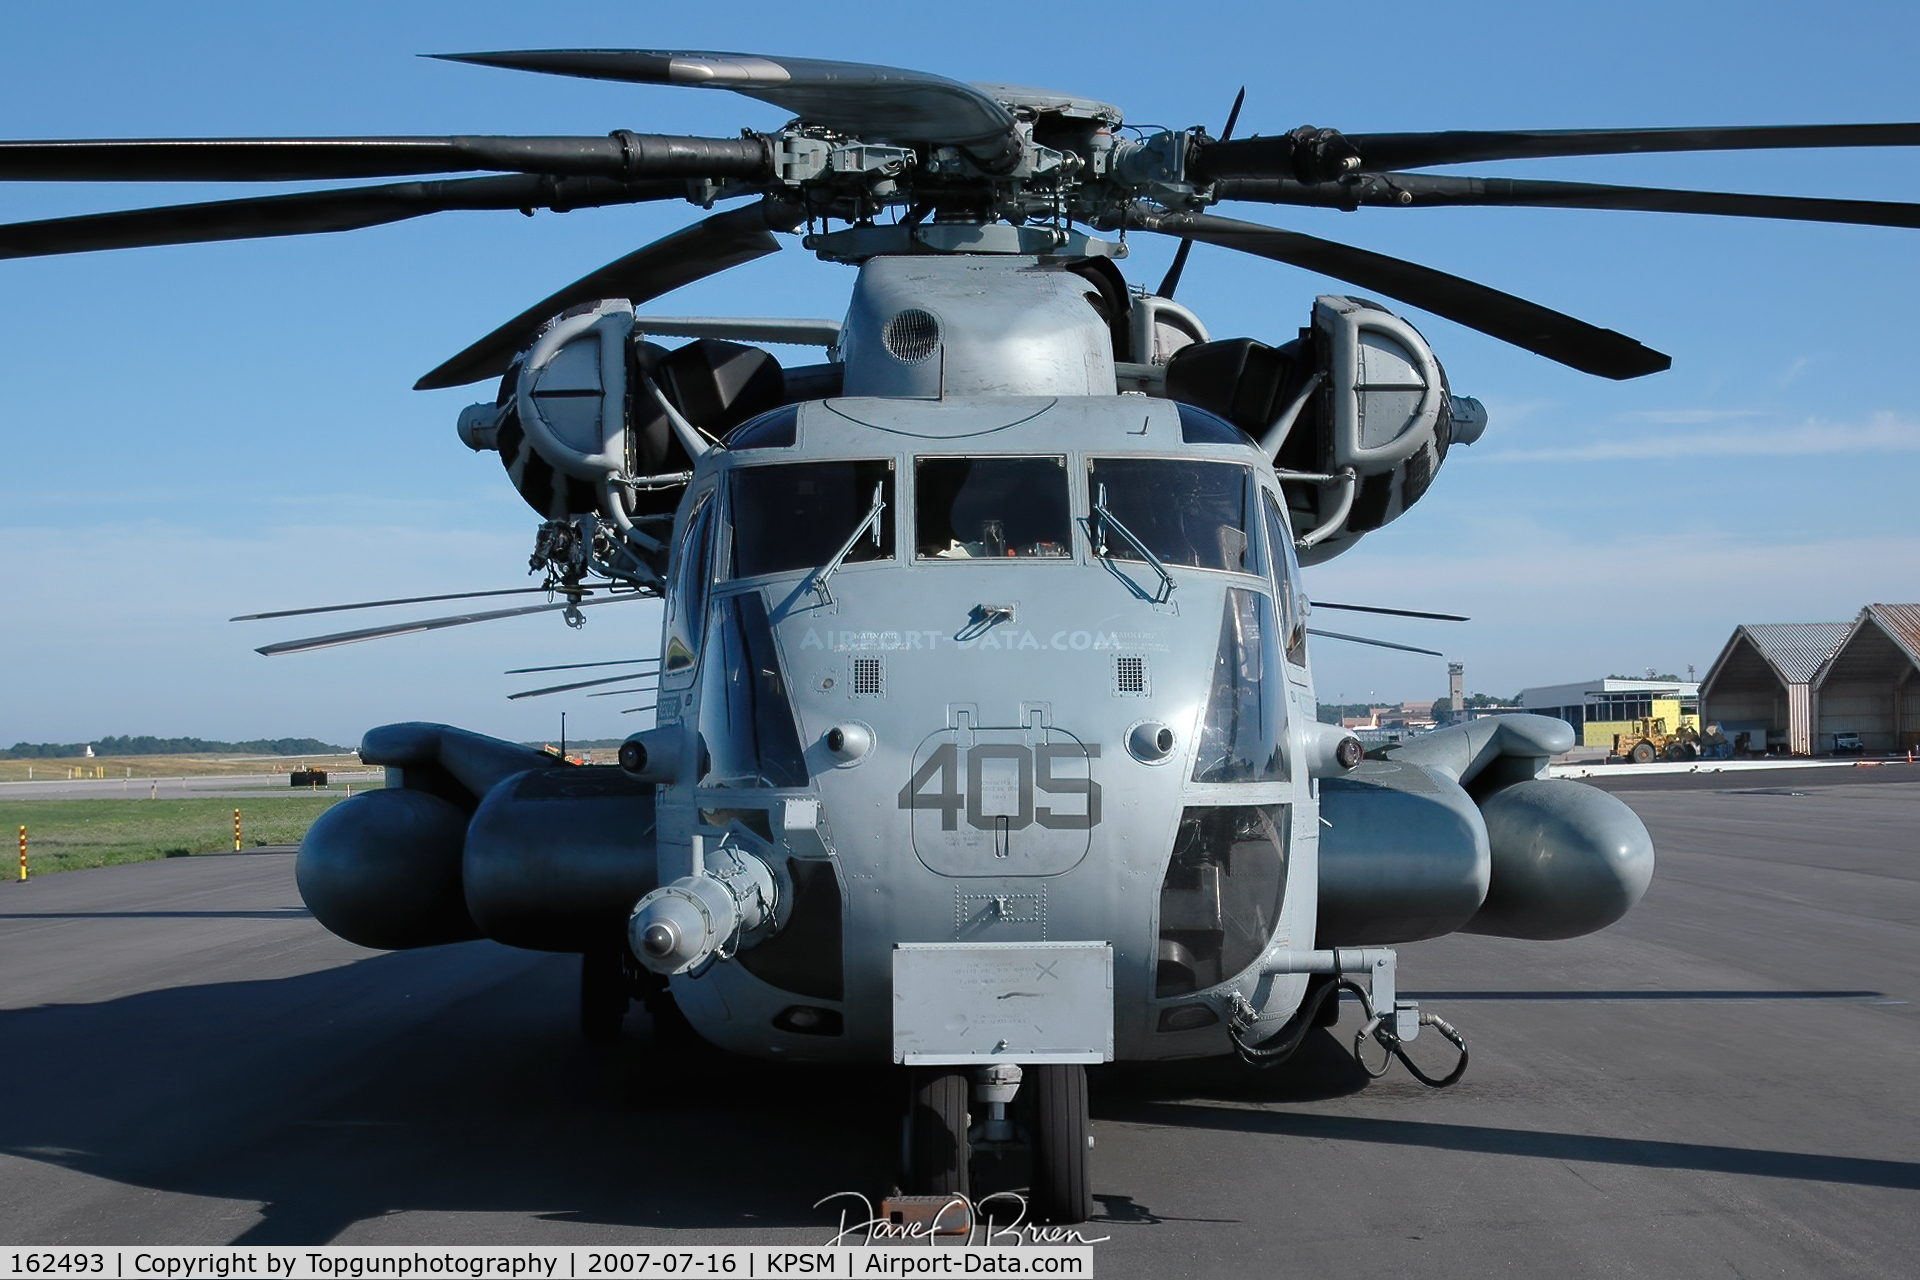 162493, Sikorsky CH-53E Super Stallion C/N 65-505, head on view of the Super Stallion